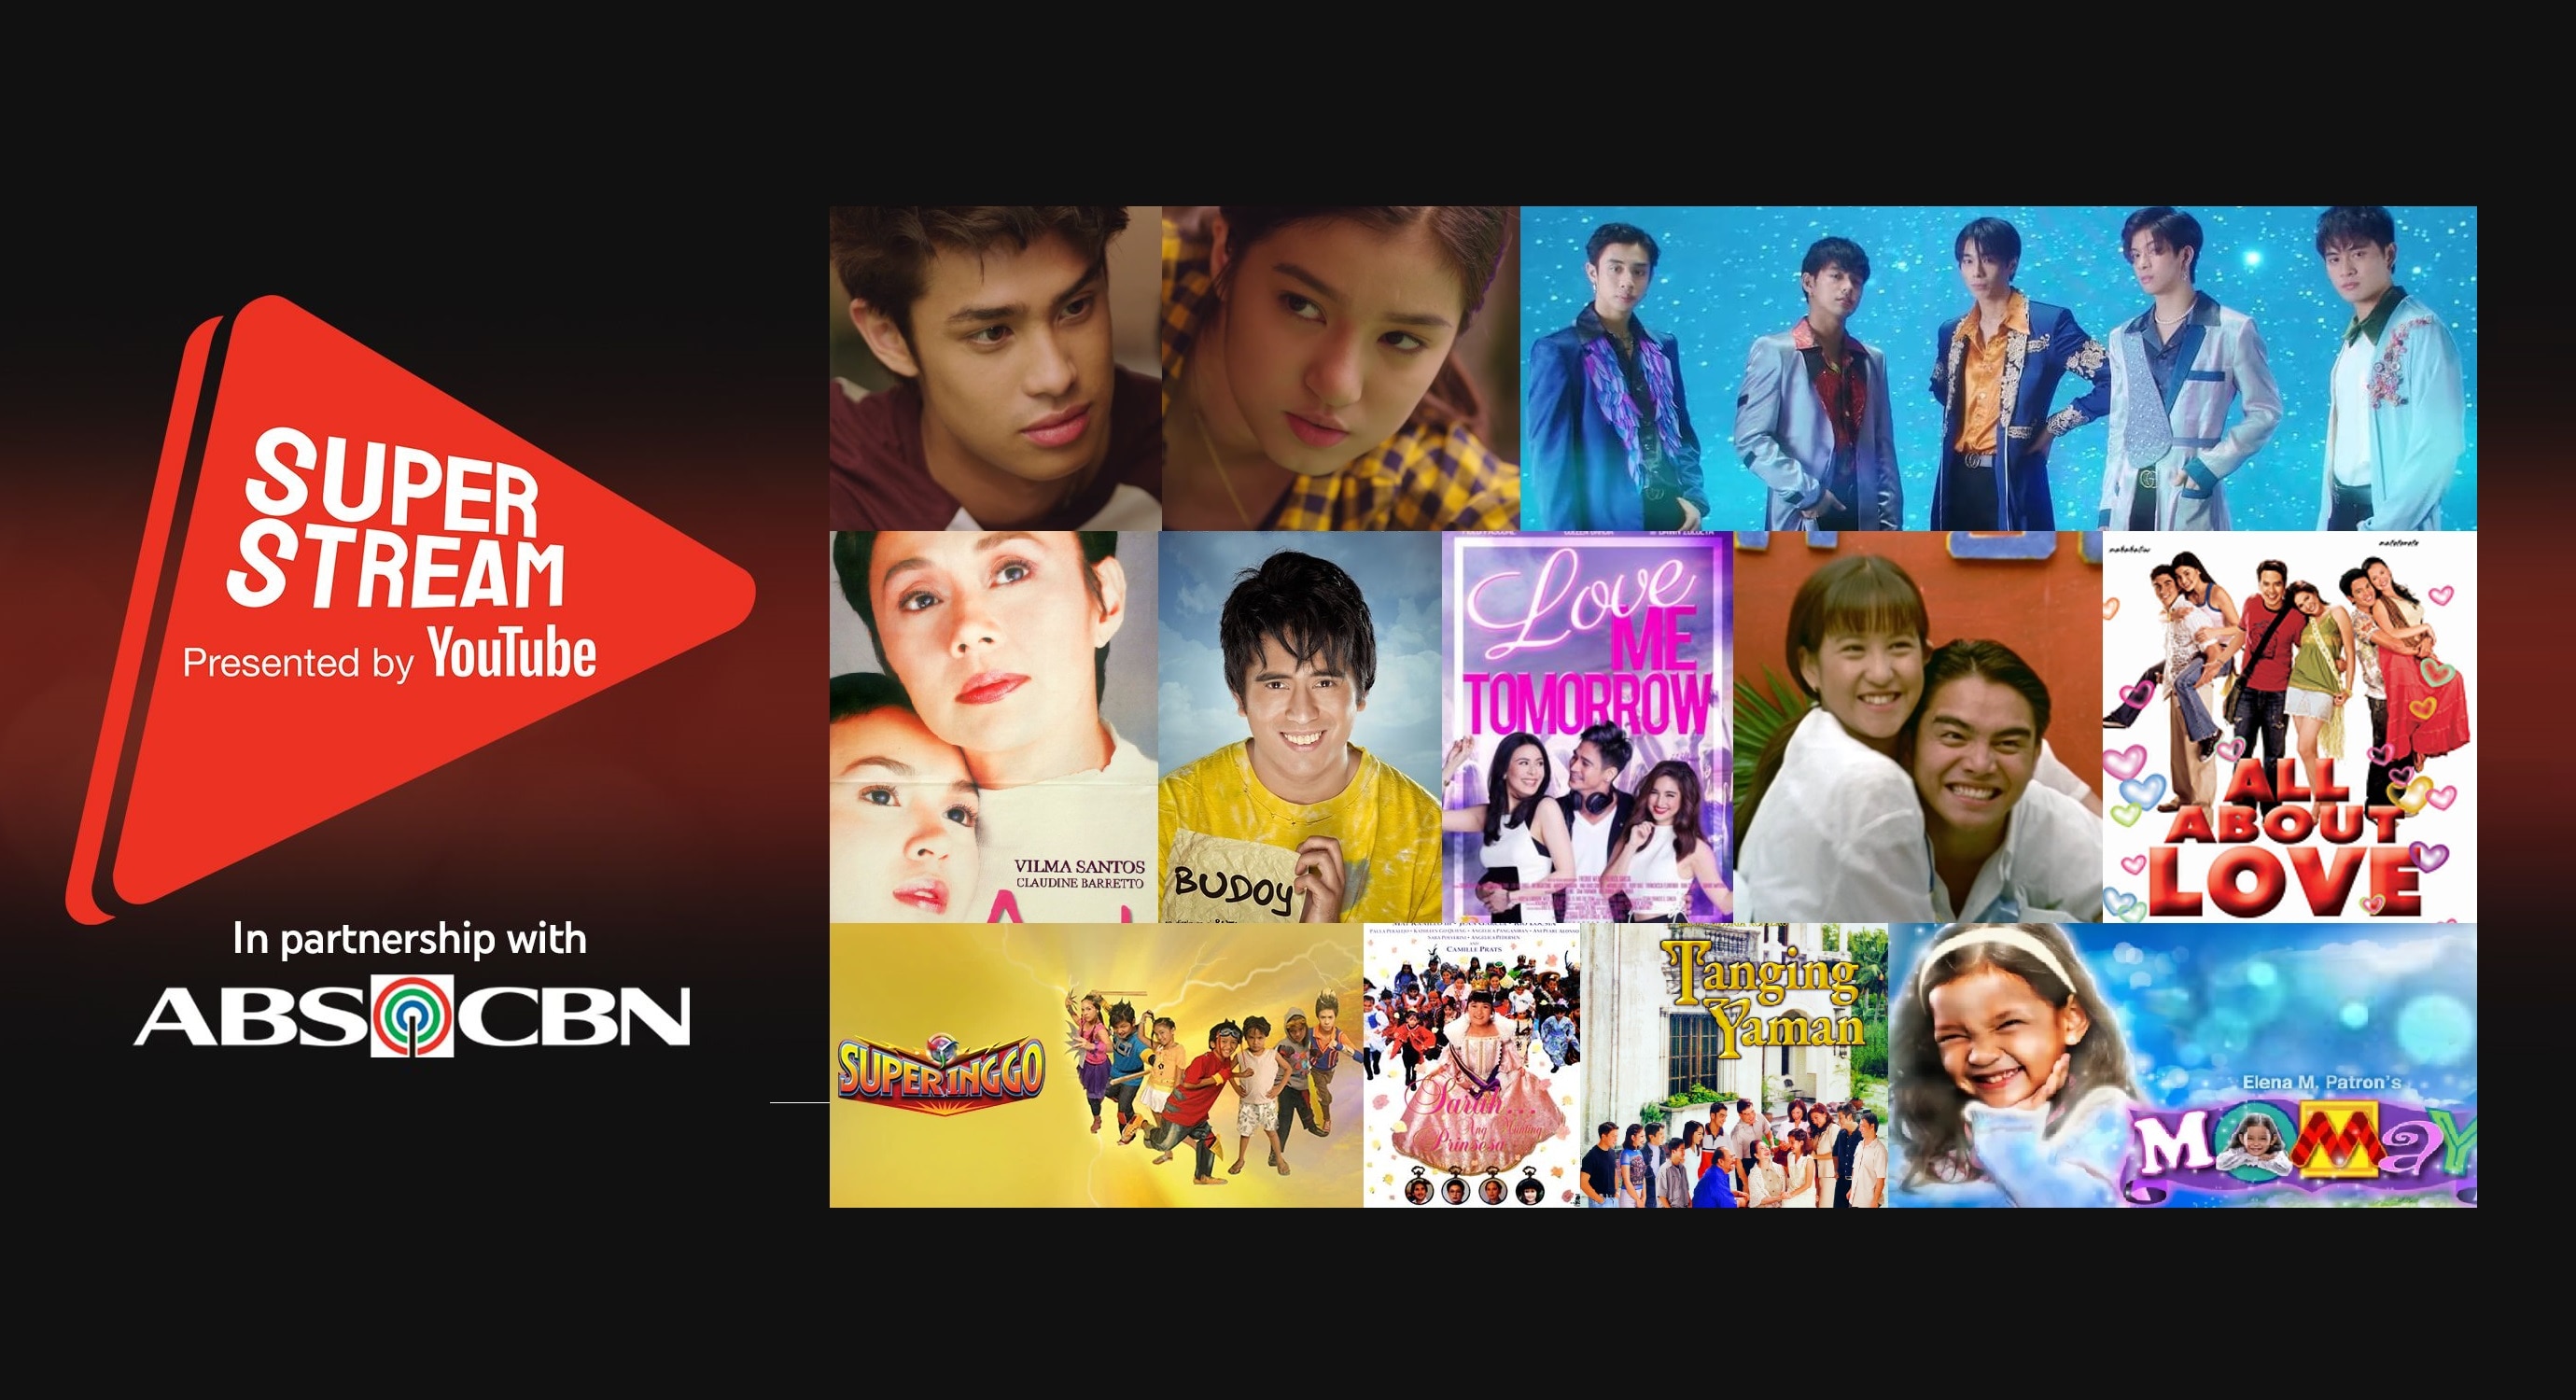 ABS-CBN gives free access to to movies, series on YouTube Super Stream this summer